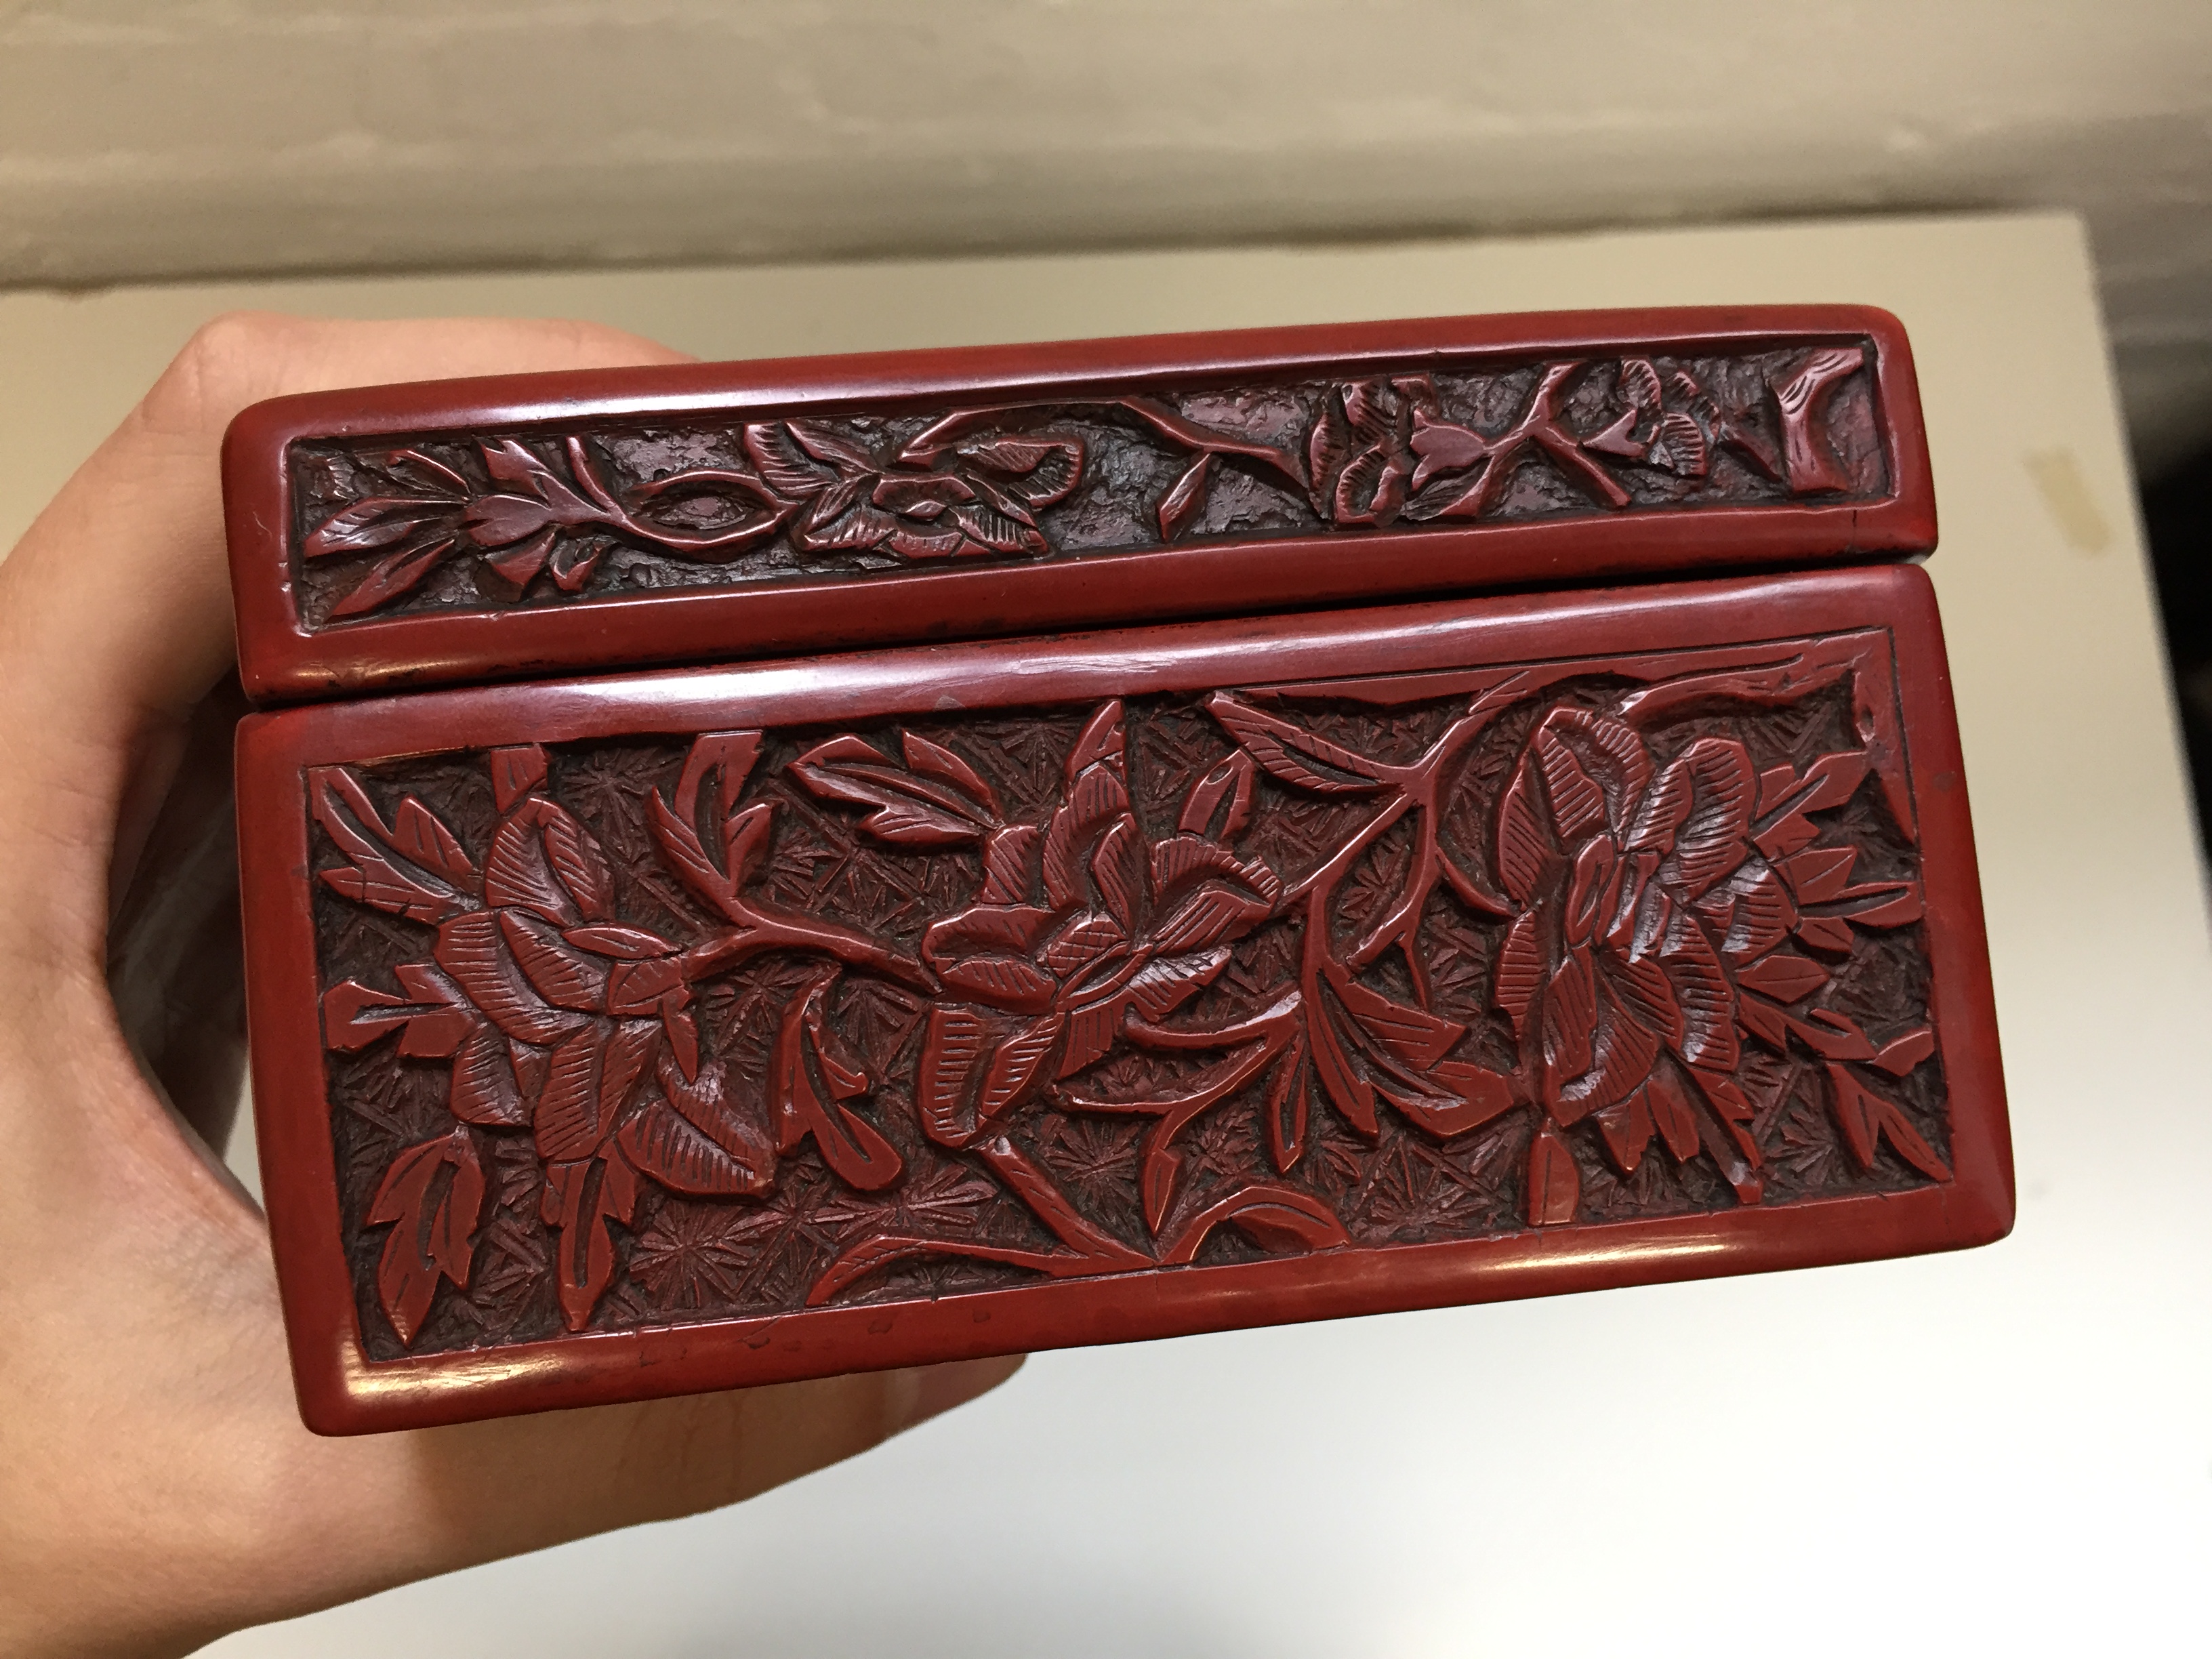 A CHINESE CINNABAR LACQUER 'MUSICIAN' BOX AND COVER 晚明 剔紅圖高士行樂圖紋蓋盒 - Image 9 of 20